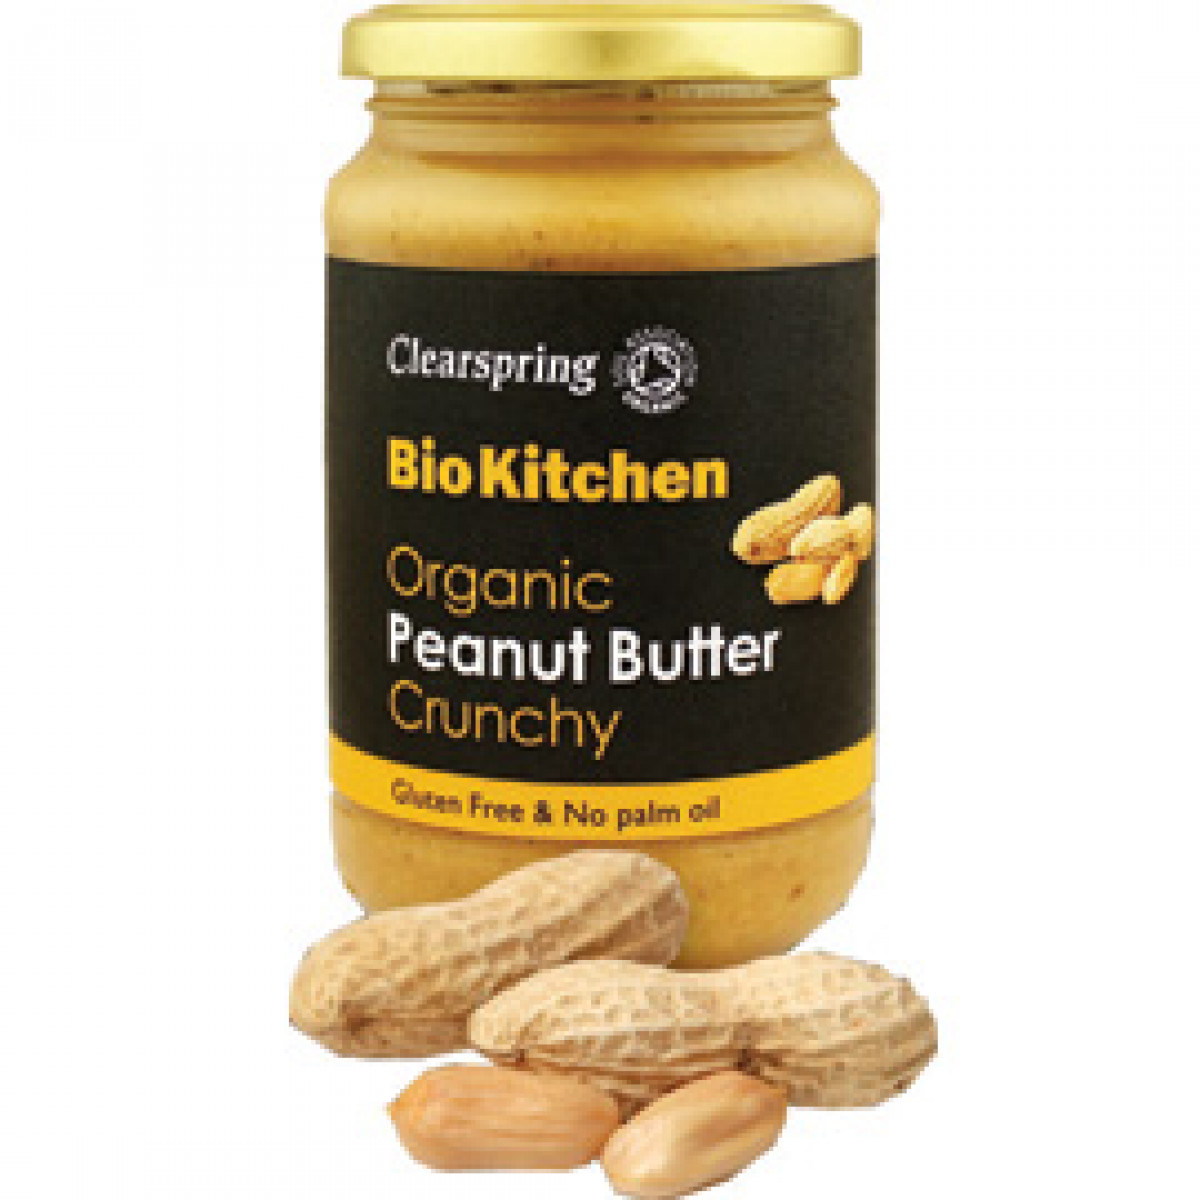 Product picture for Peanut Butter Crunchy